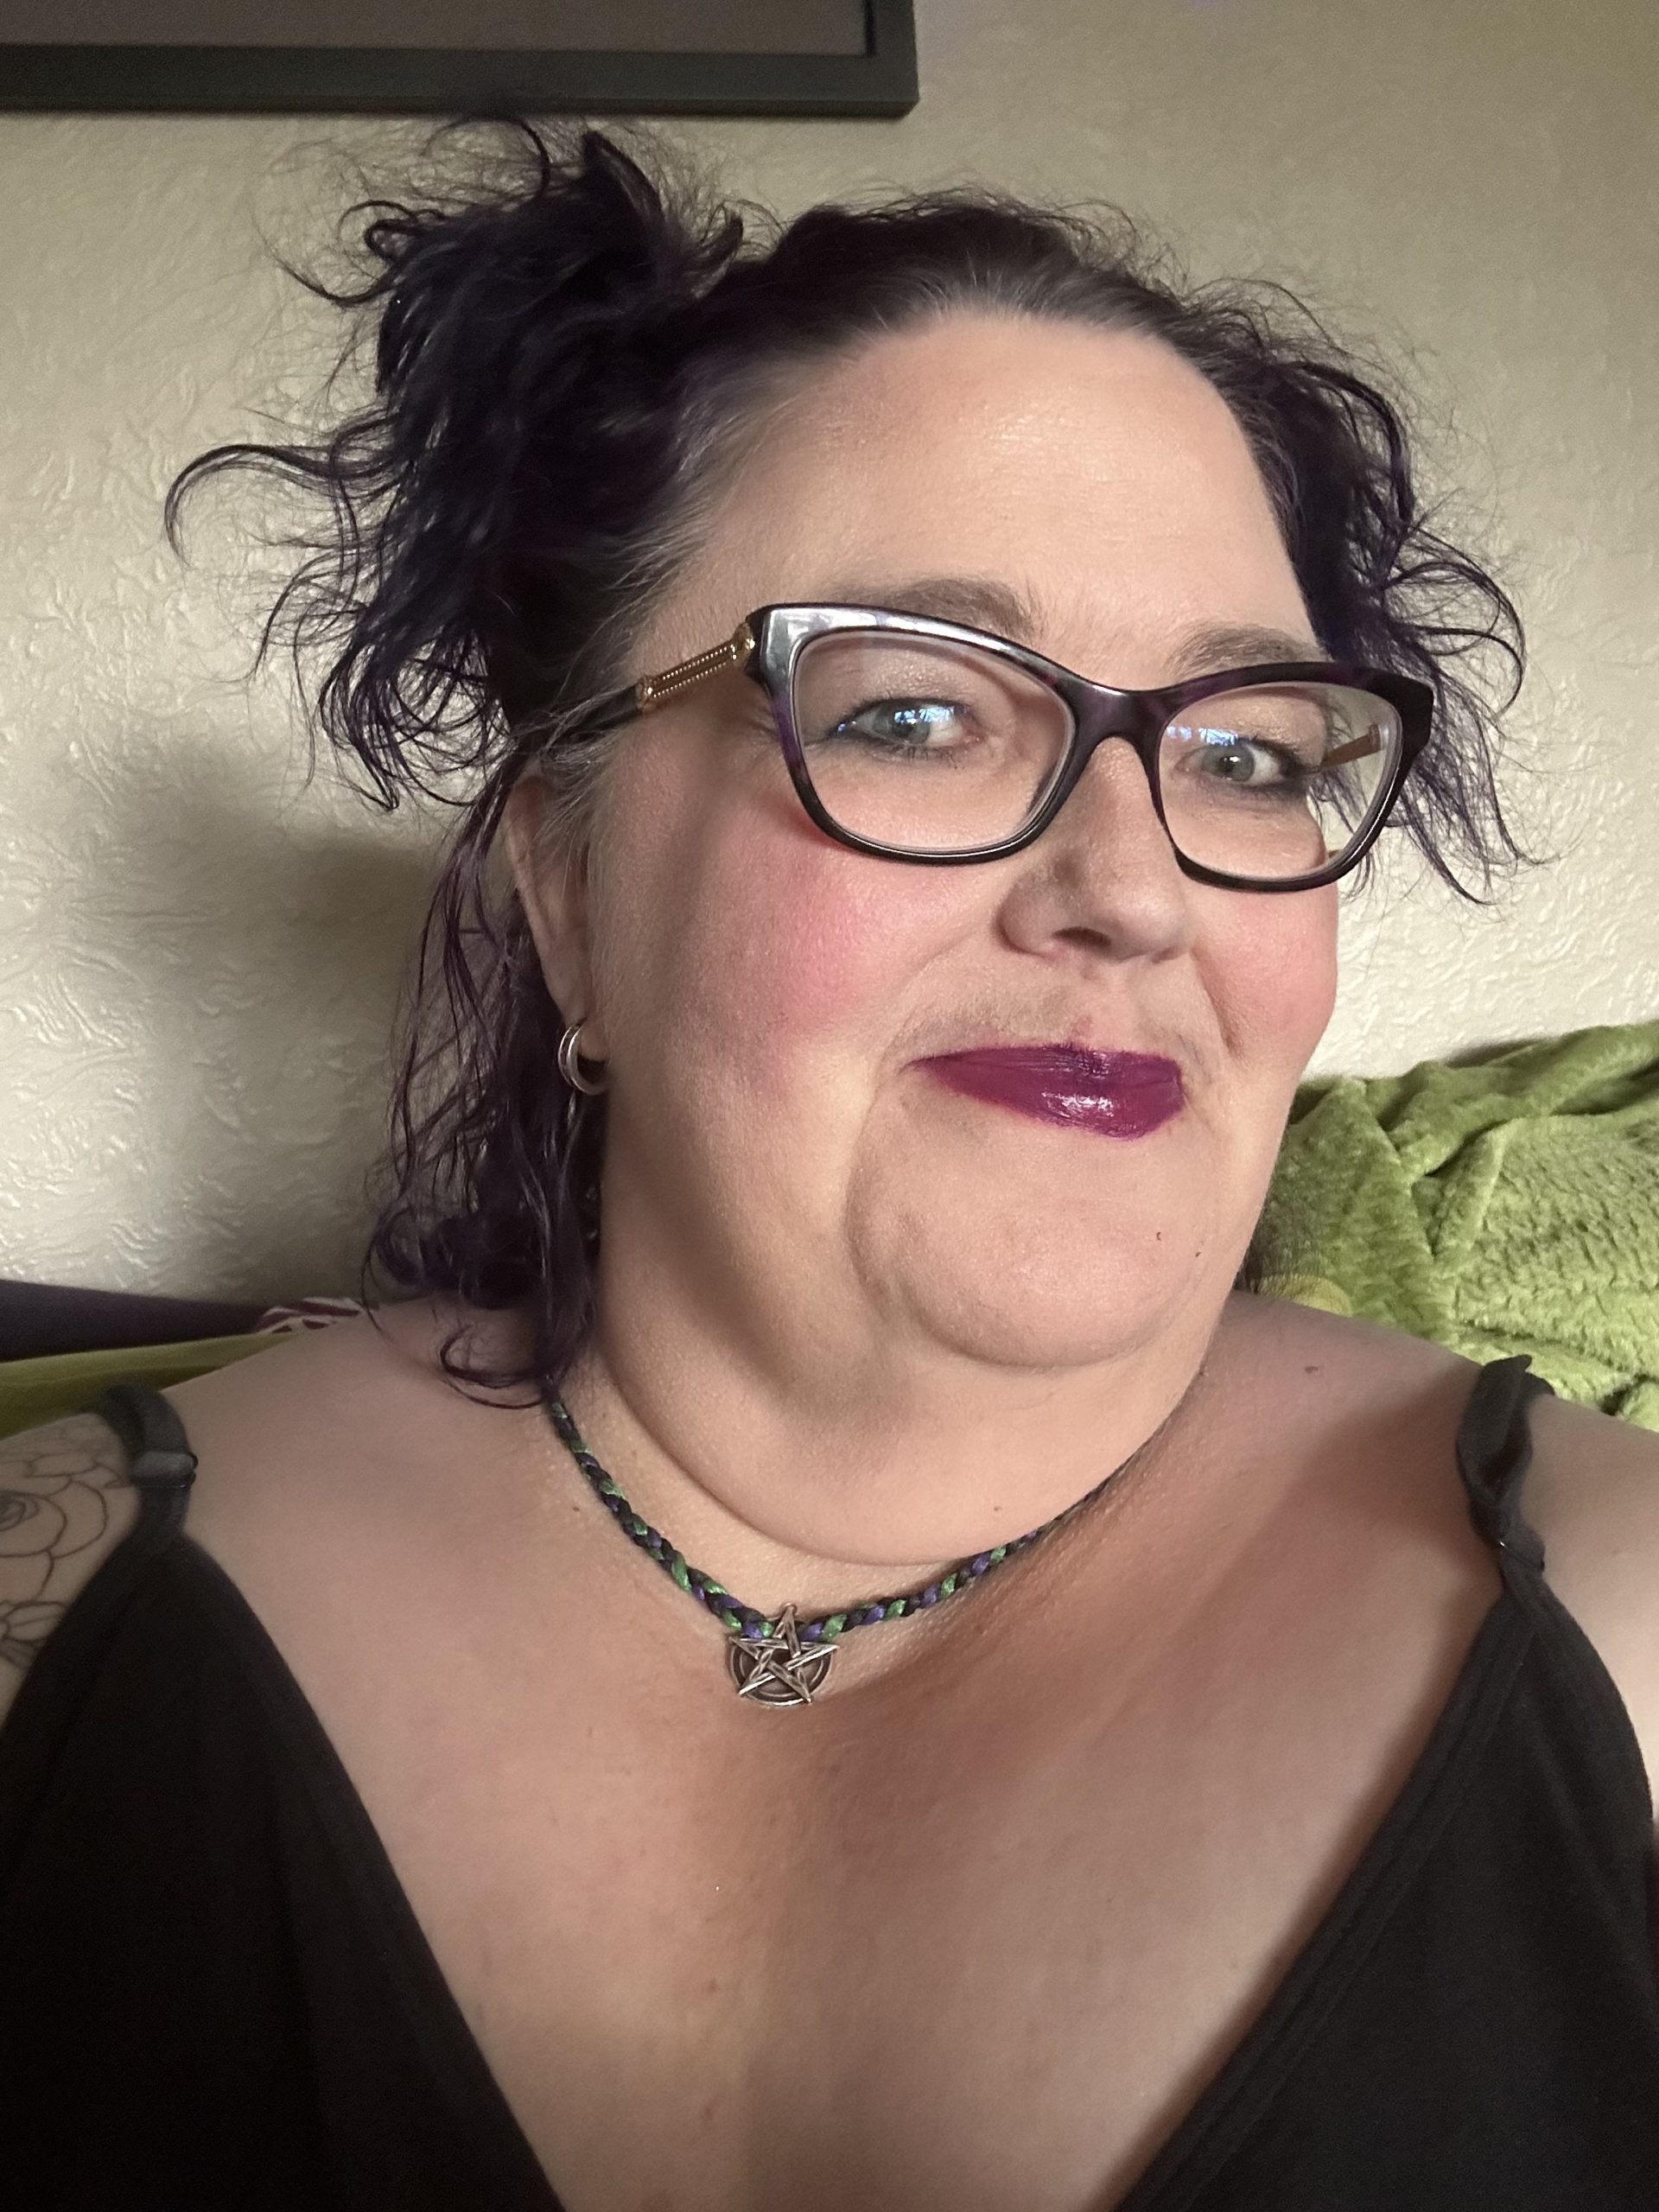 head and shoulders of me, a fat white woman with dark purple hair up on either side of her head. I am wearing black and purple tortoiseshell glass and vibrant, shiny fuchsia lipstick.